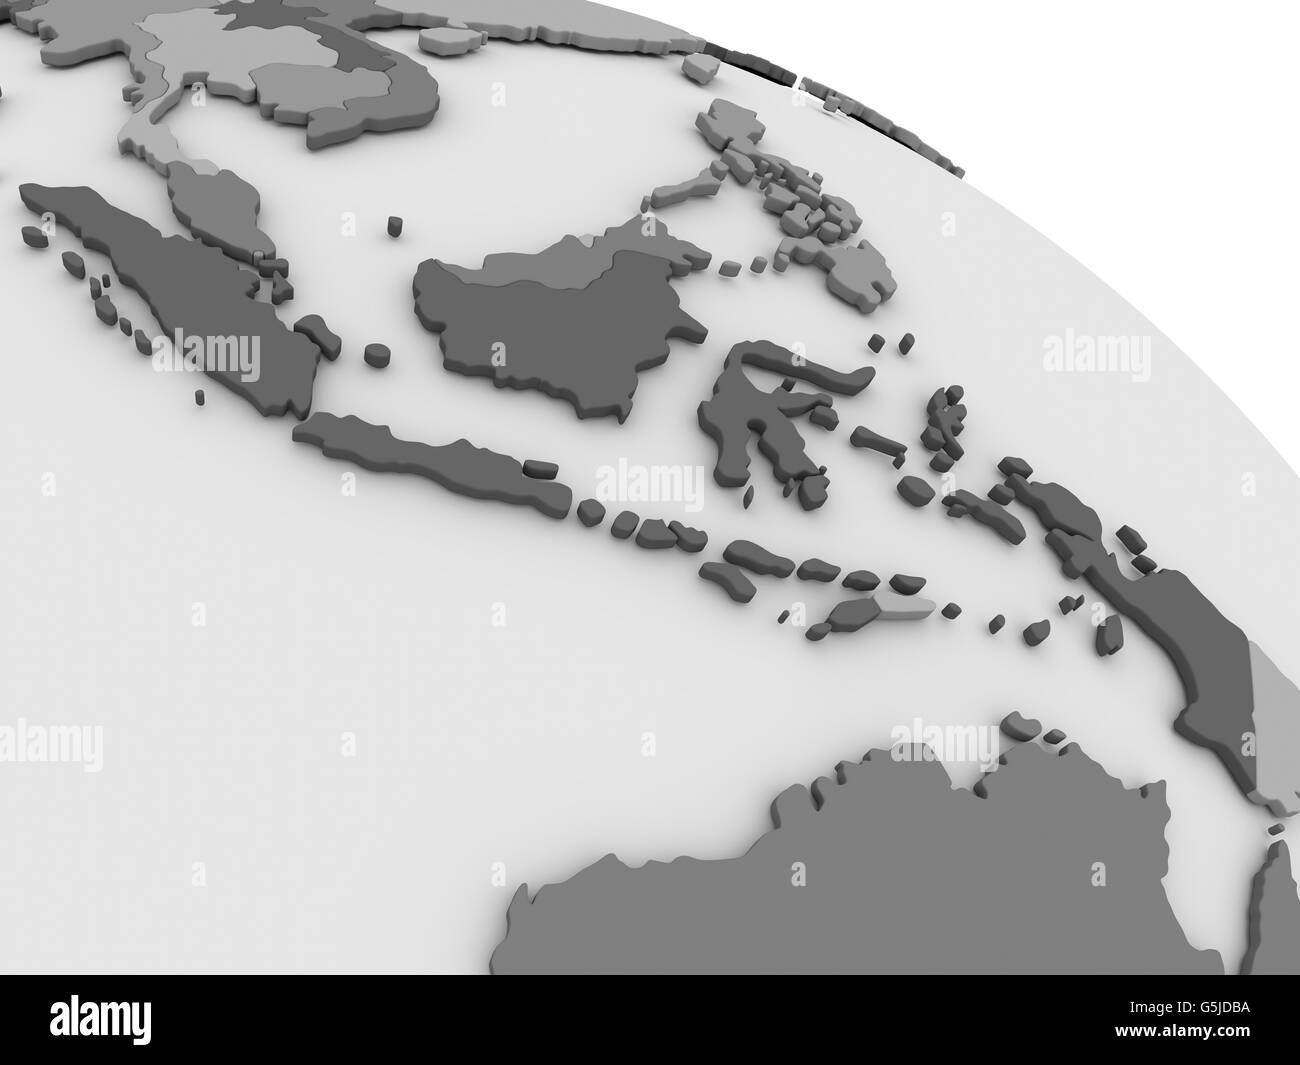 Map of Indonesia on grey model of Earth. 3D illustration Stock Photo